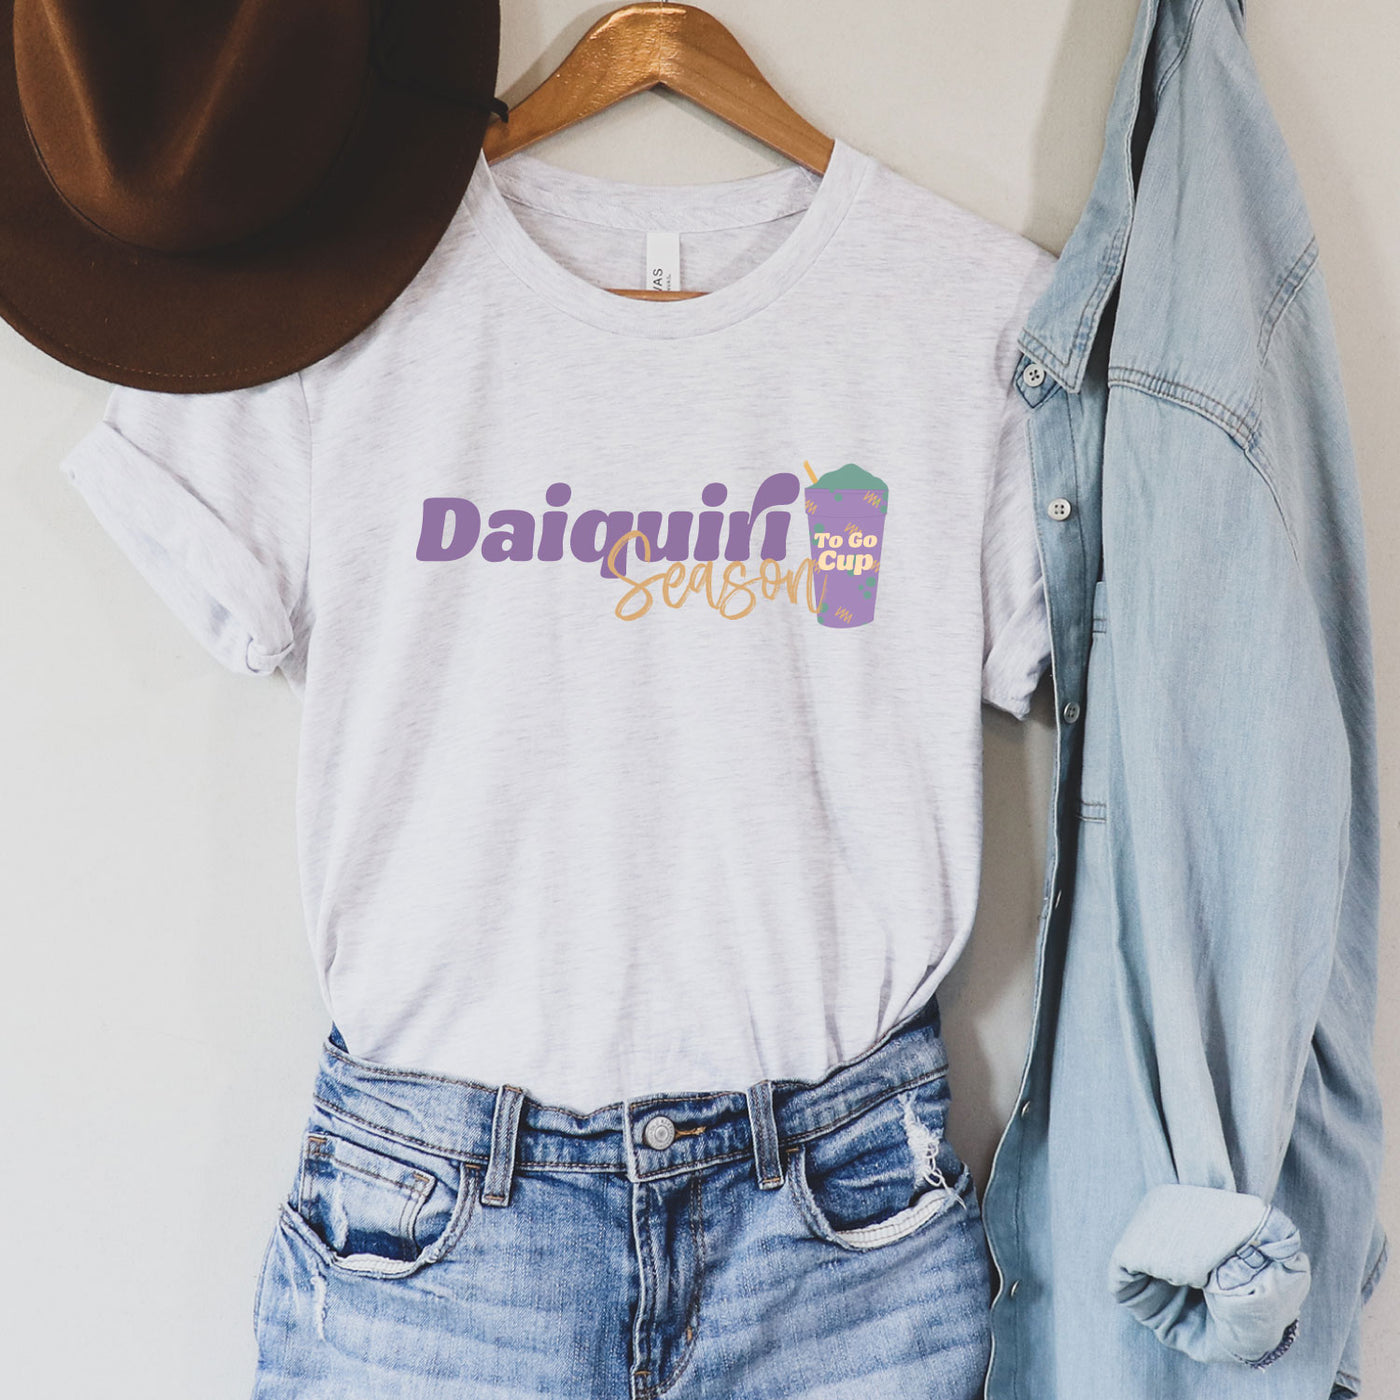 Ash gray tee with graphic. Graphic says Daiquiri Season, Daquiri is in purple letters and season is underneath it in a smaller yellow cursive font. To the right of the text there is a purple cup with green liquid and a yellow straw, the cup has yellow and green designs and the words To Go Cup in yellow.